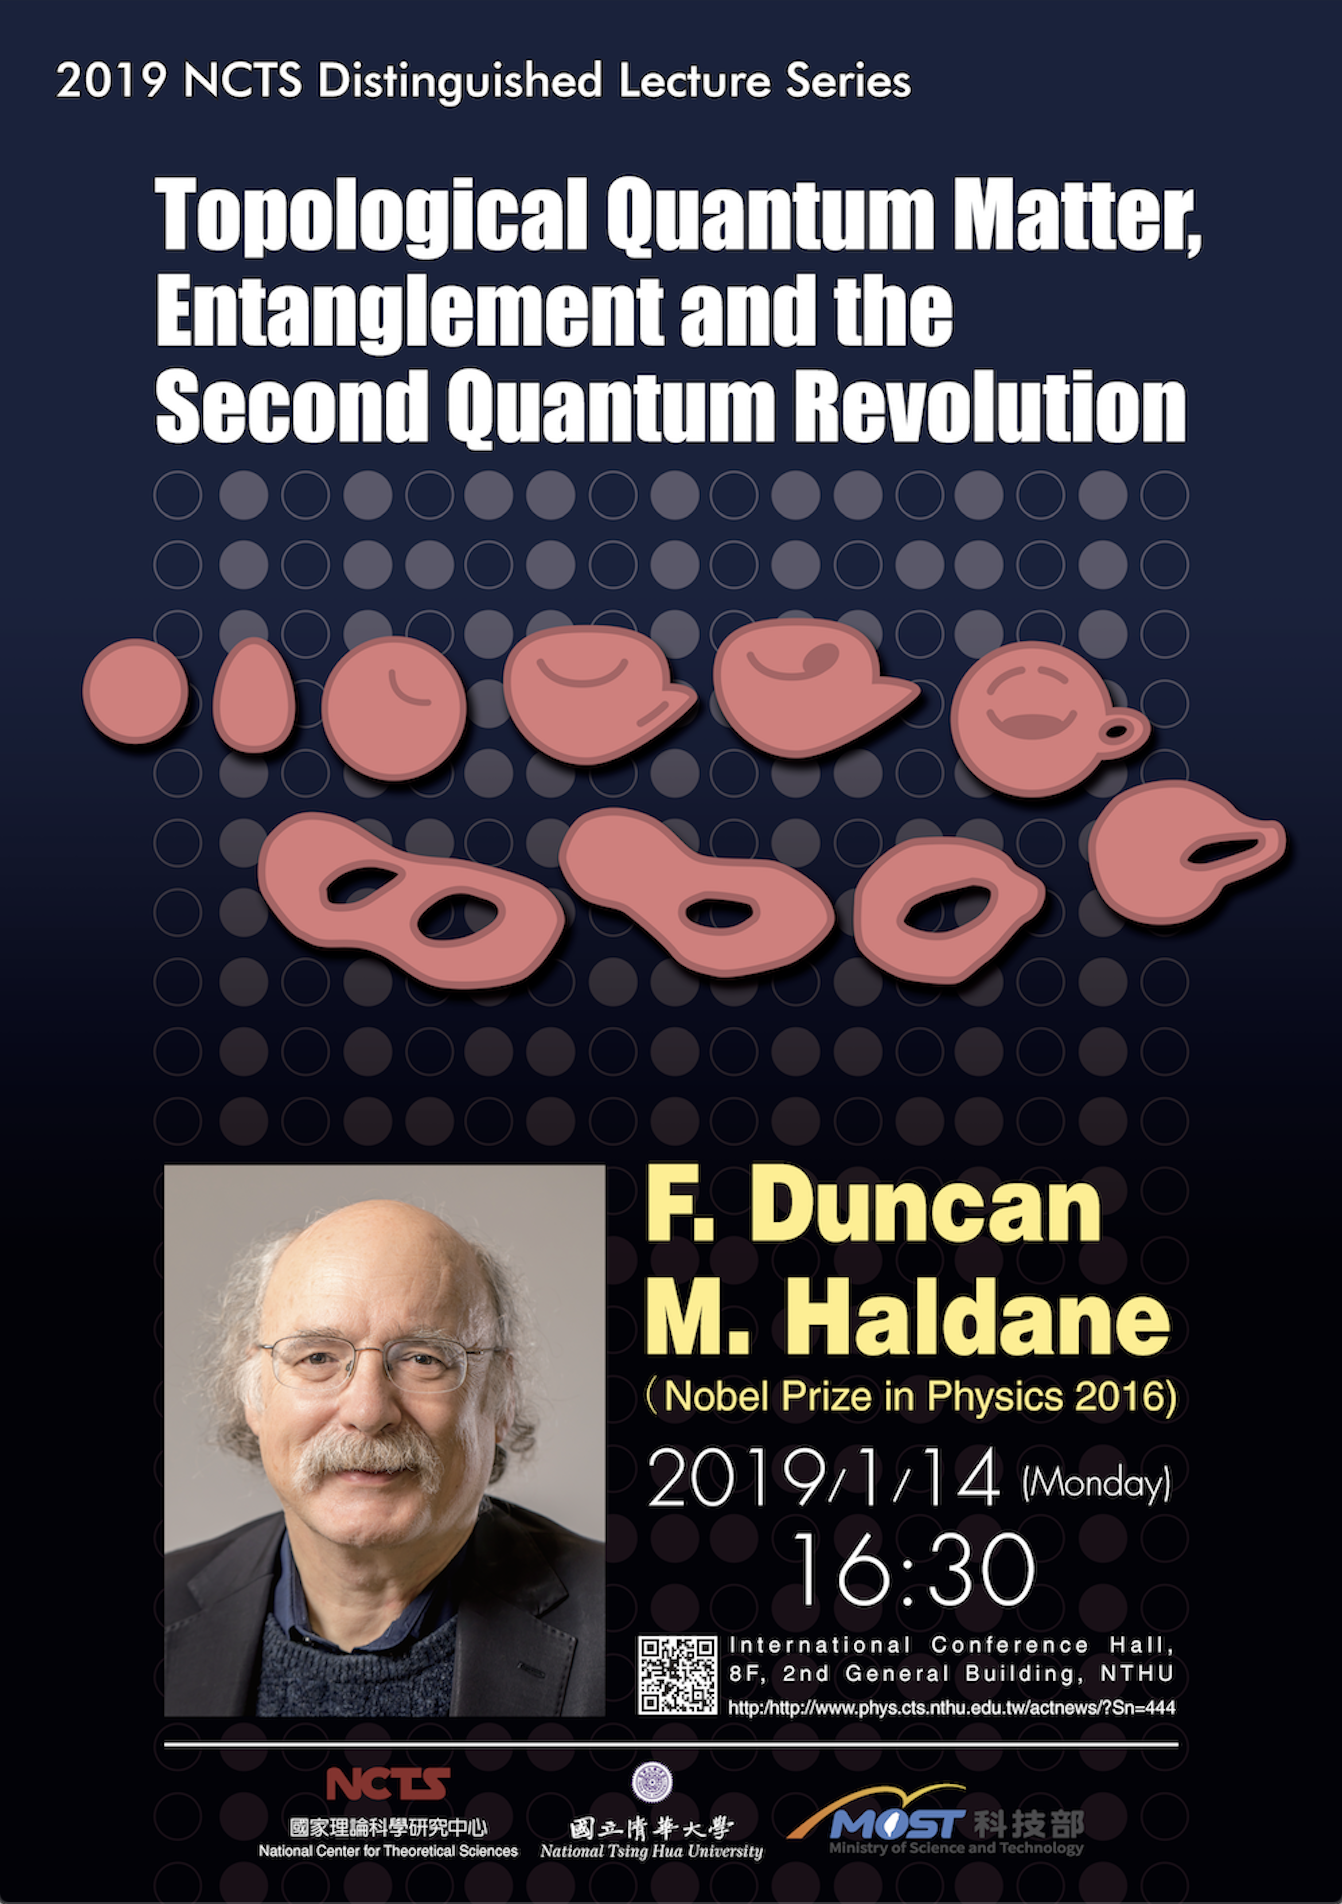 NCTS Distinguished Lecture - Topological Quantum Matter, Entanglement and the Second Quantum Revolution (2019)